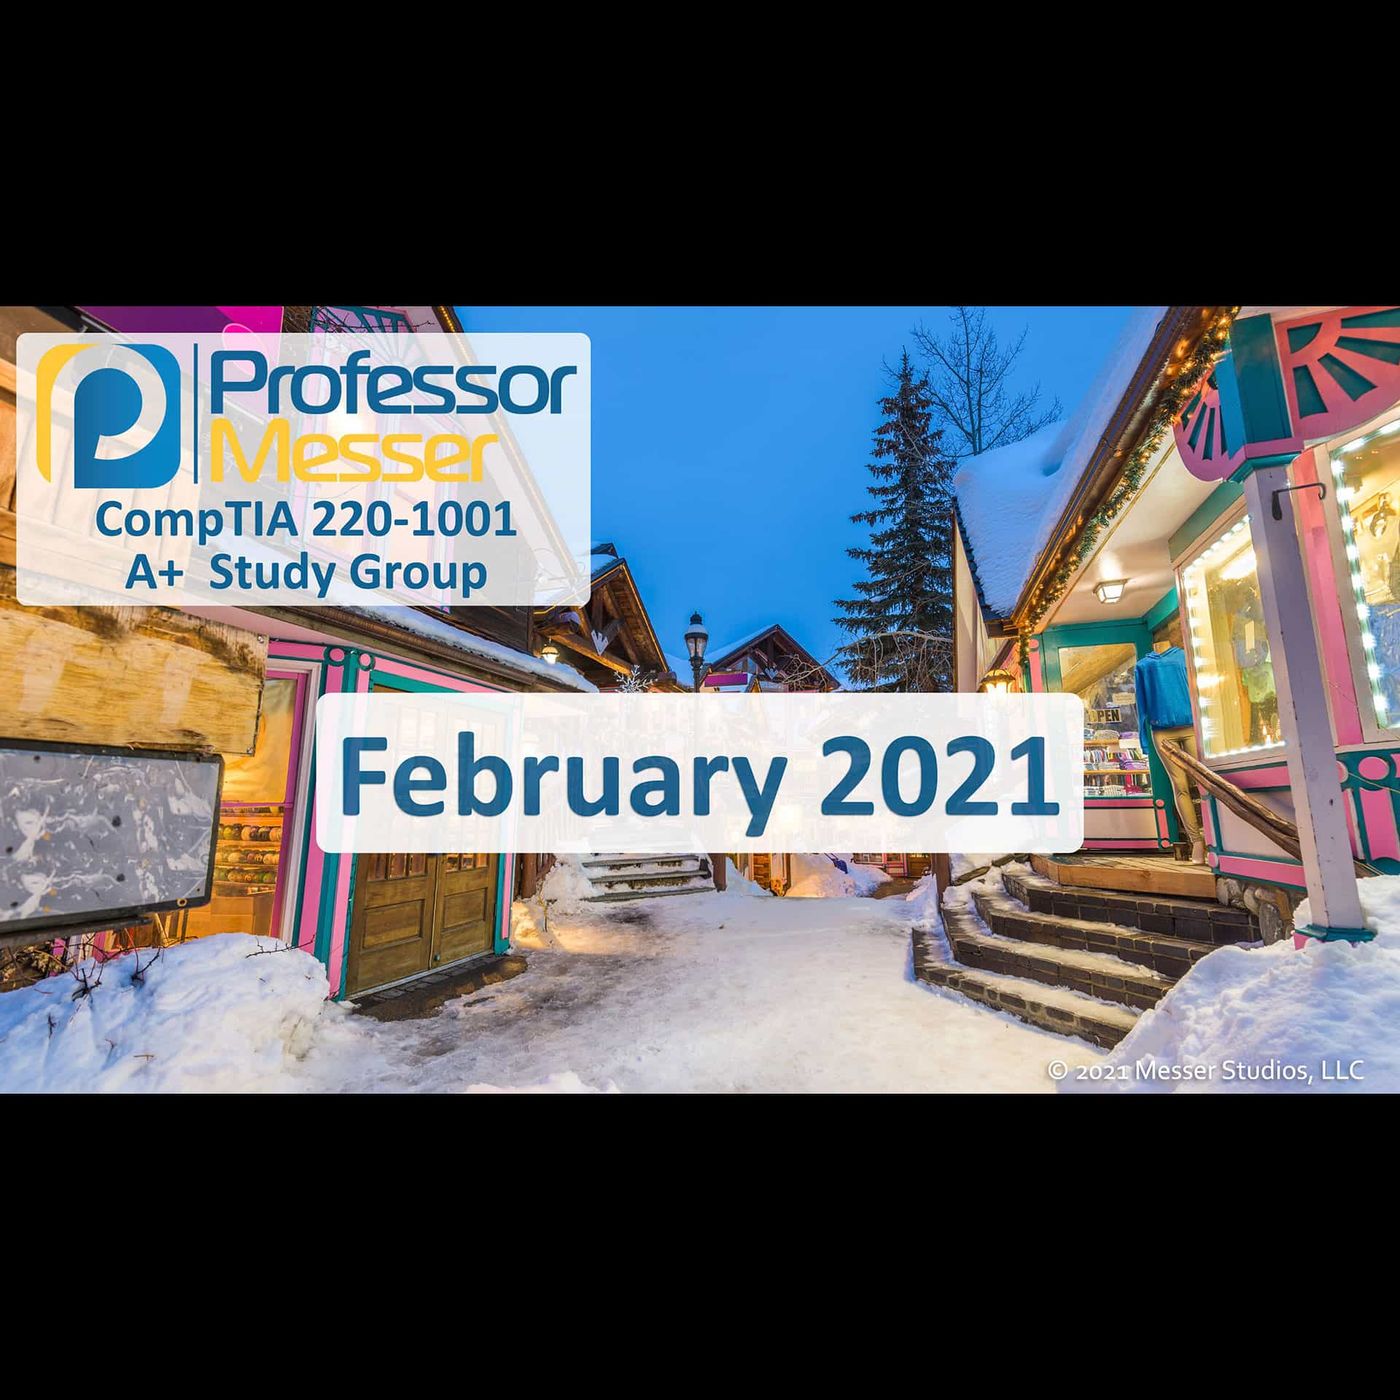 Professor Messer's CompTIA 220-1001 A+ Study Group After Show - January 2021